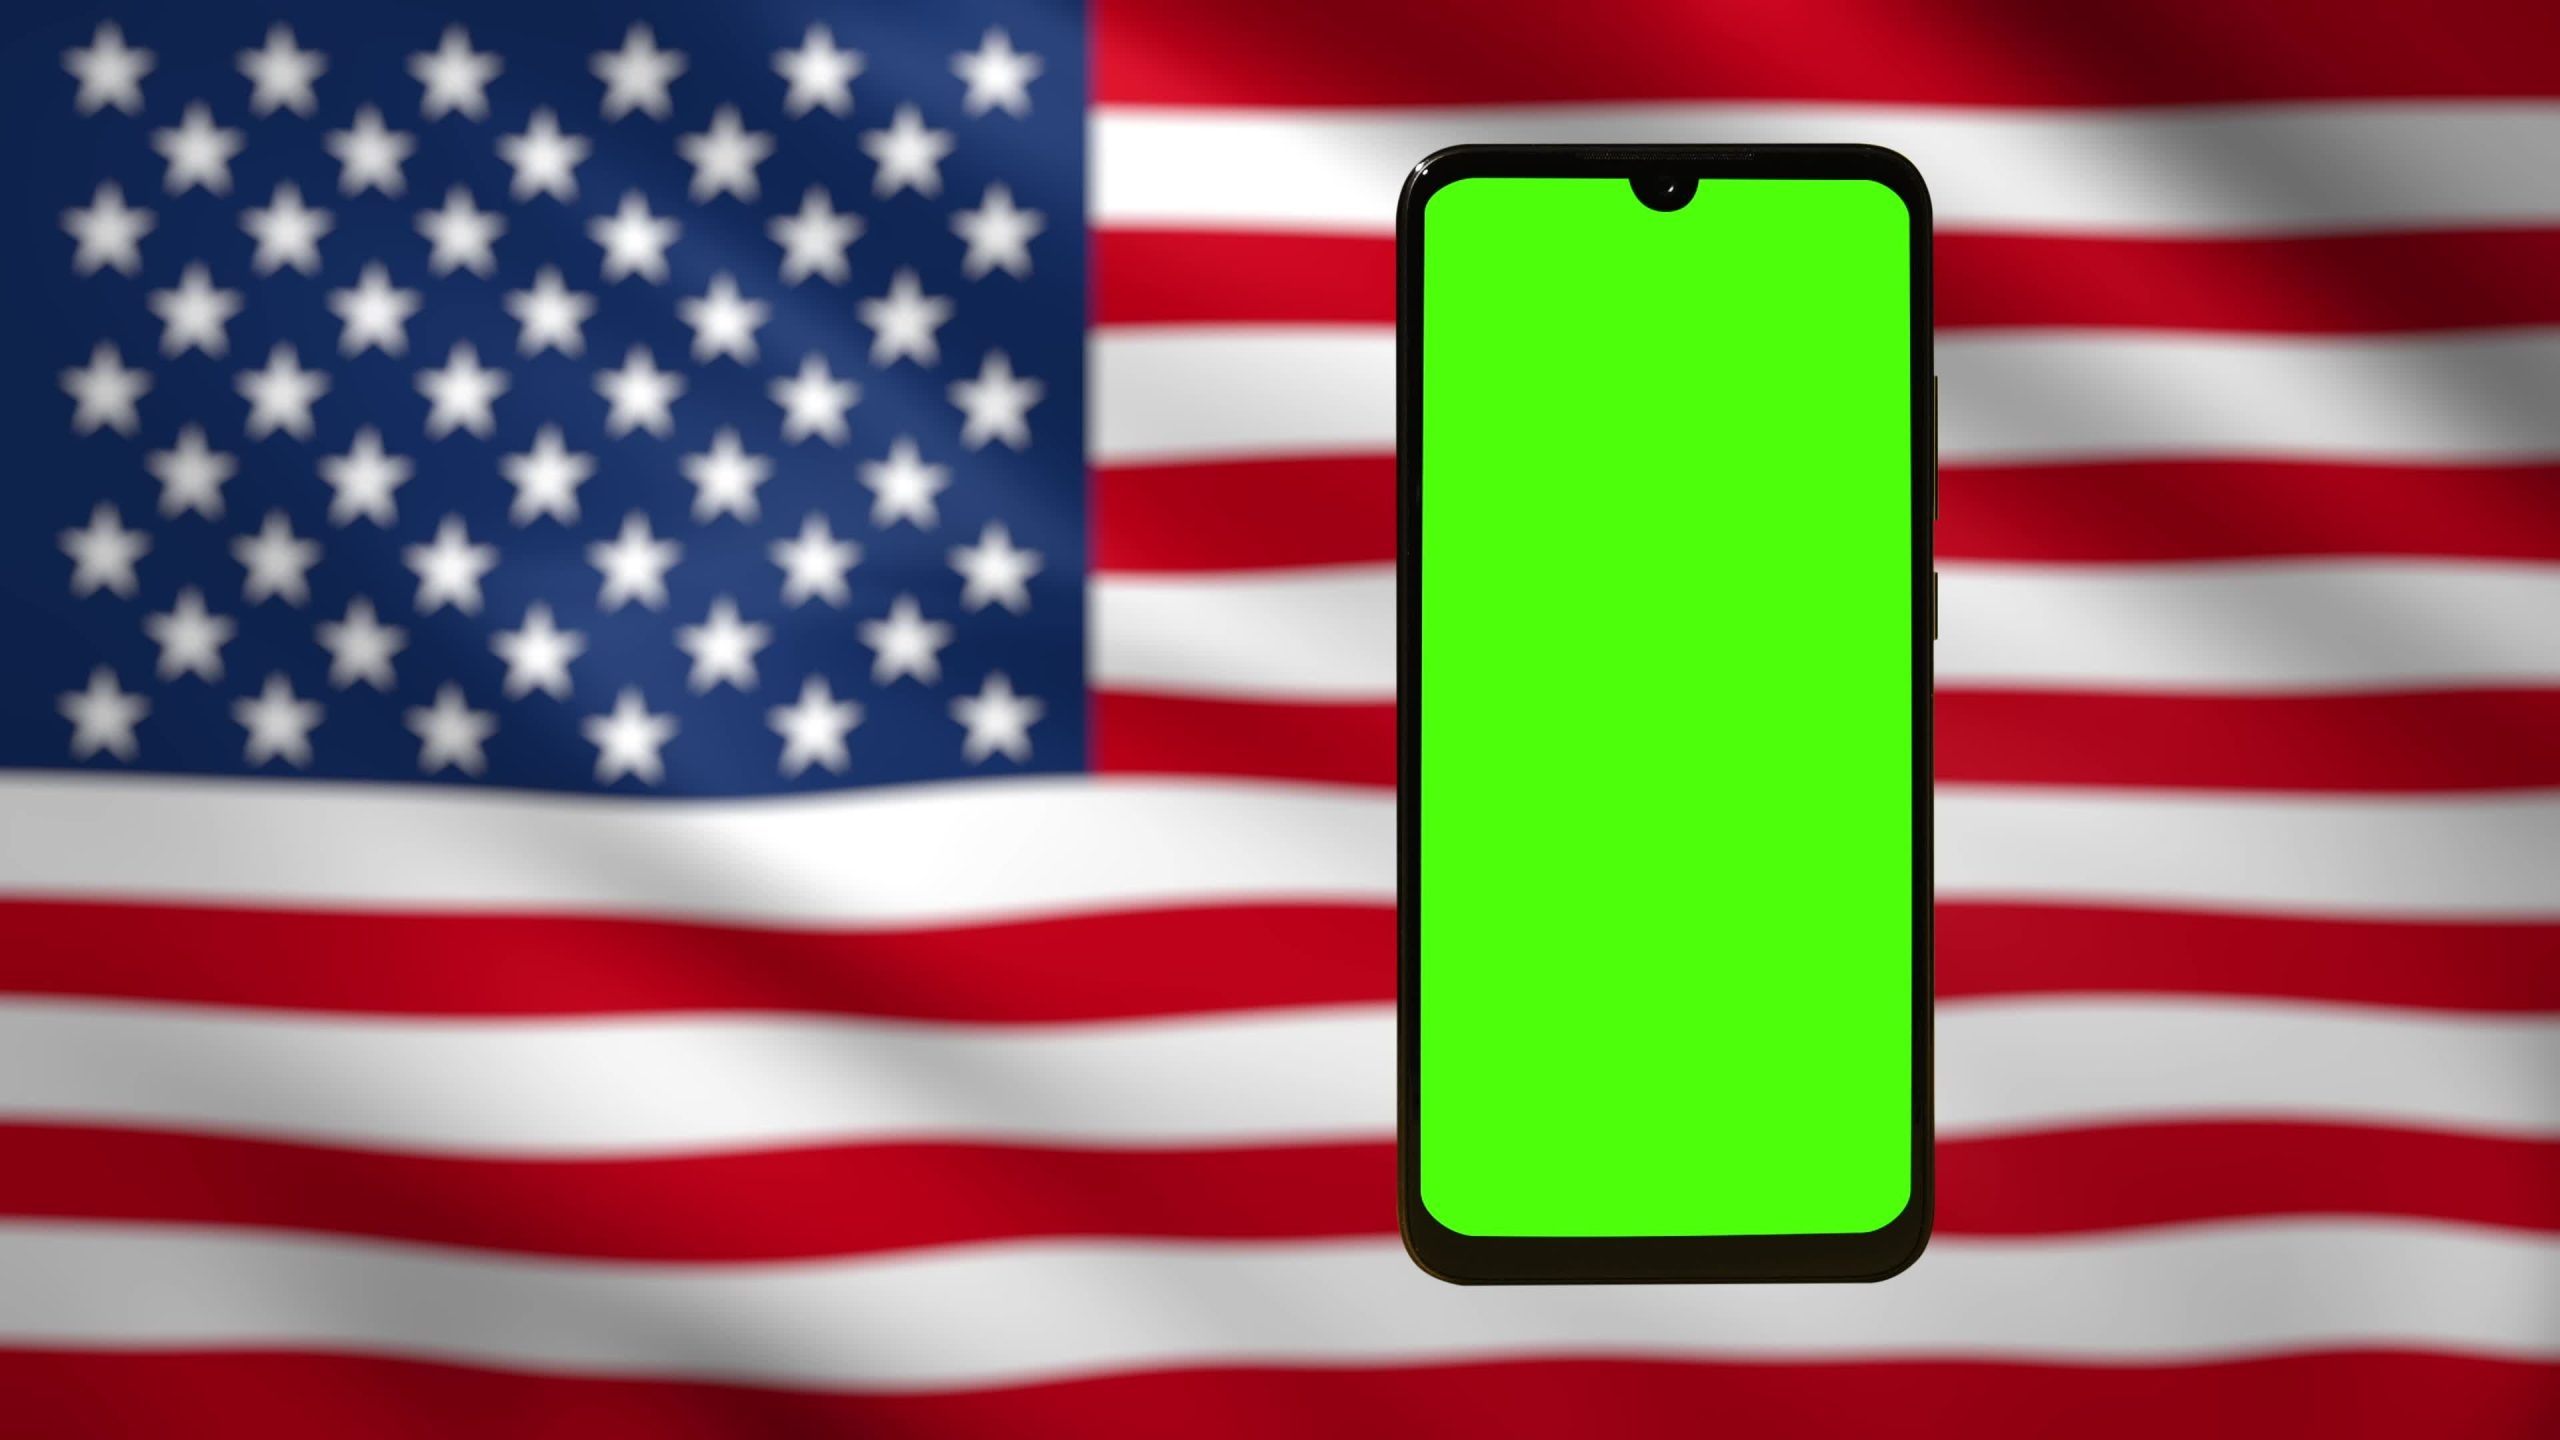 Mobile phone with chromakey screen against american flag